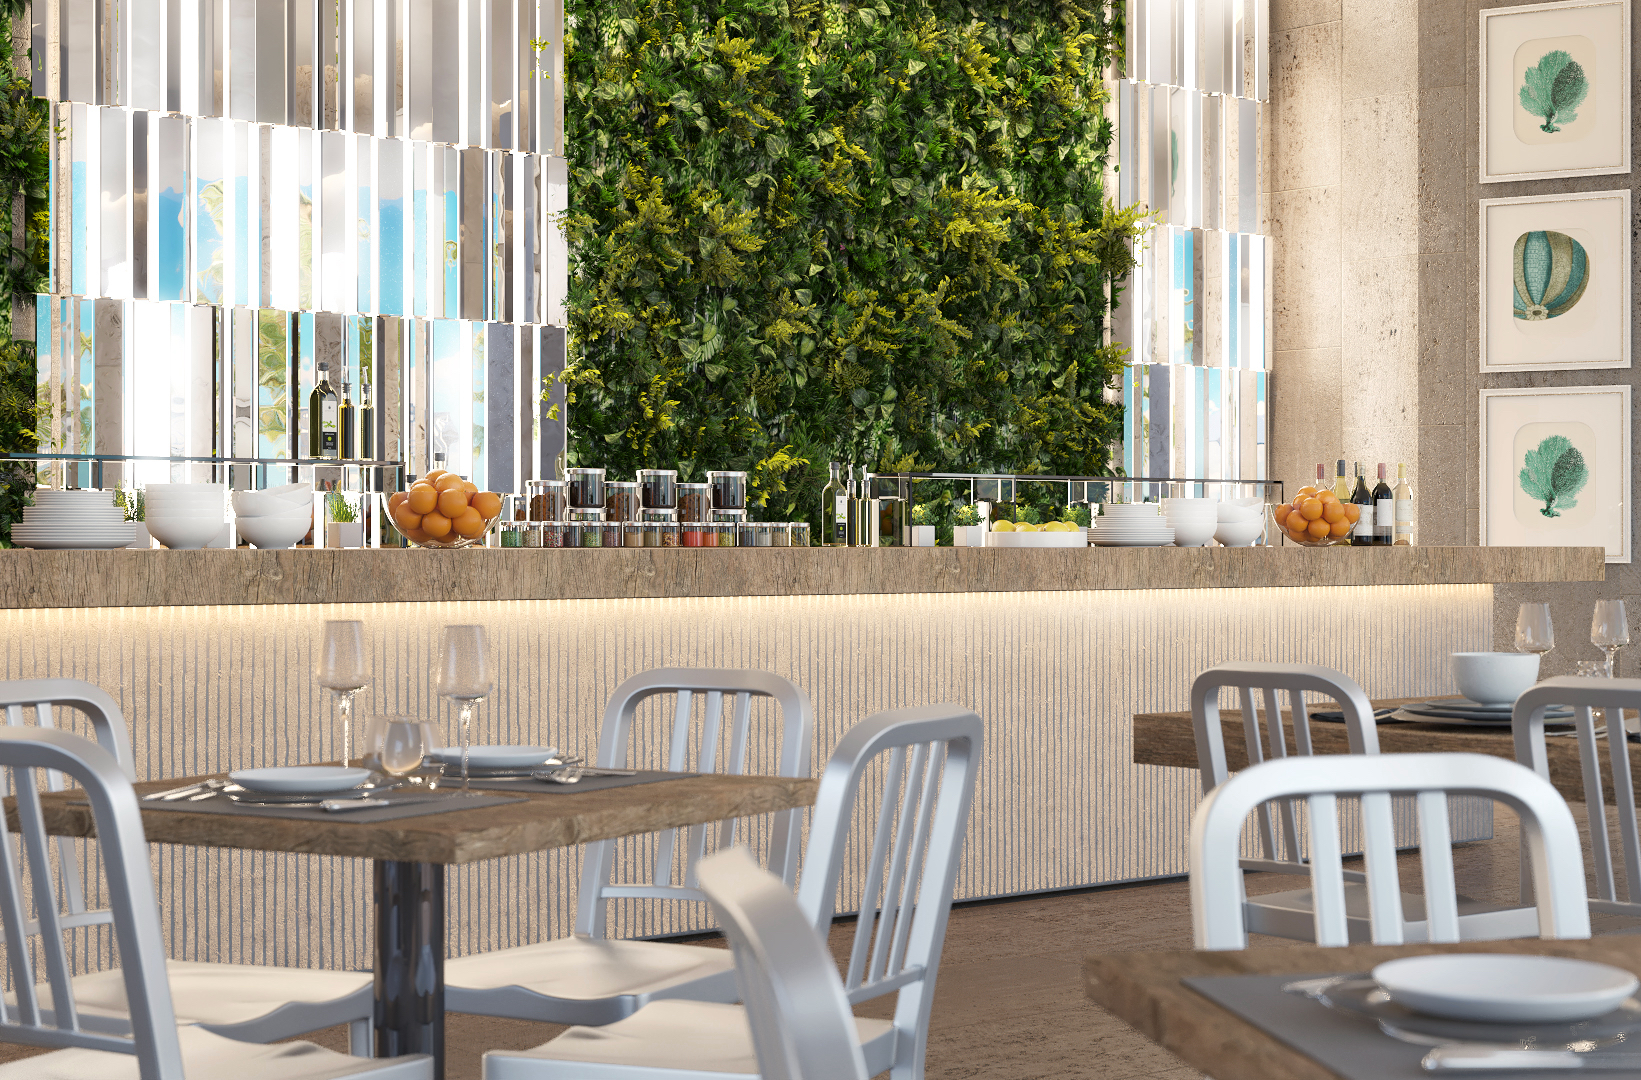 A rendering of one of Kailani Cayman's restaurants, featuring fresh farm-to-table, sustainably grown foods.